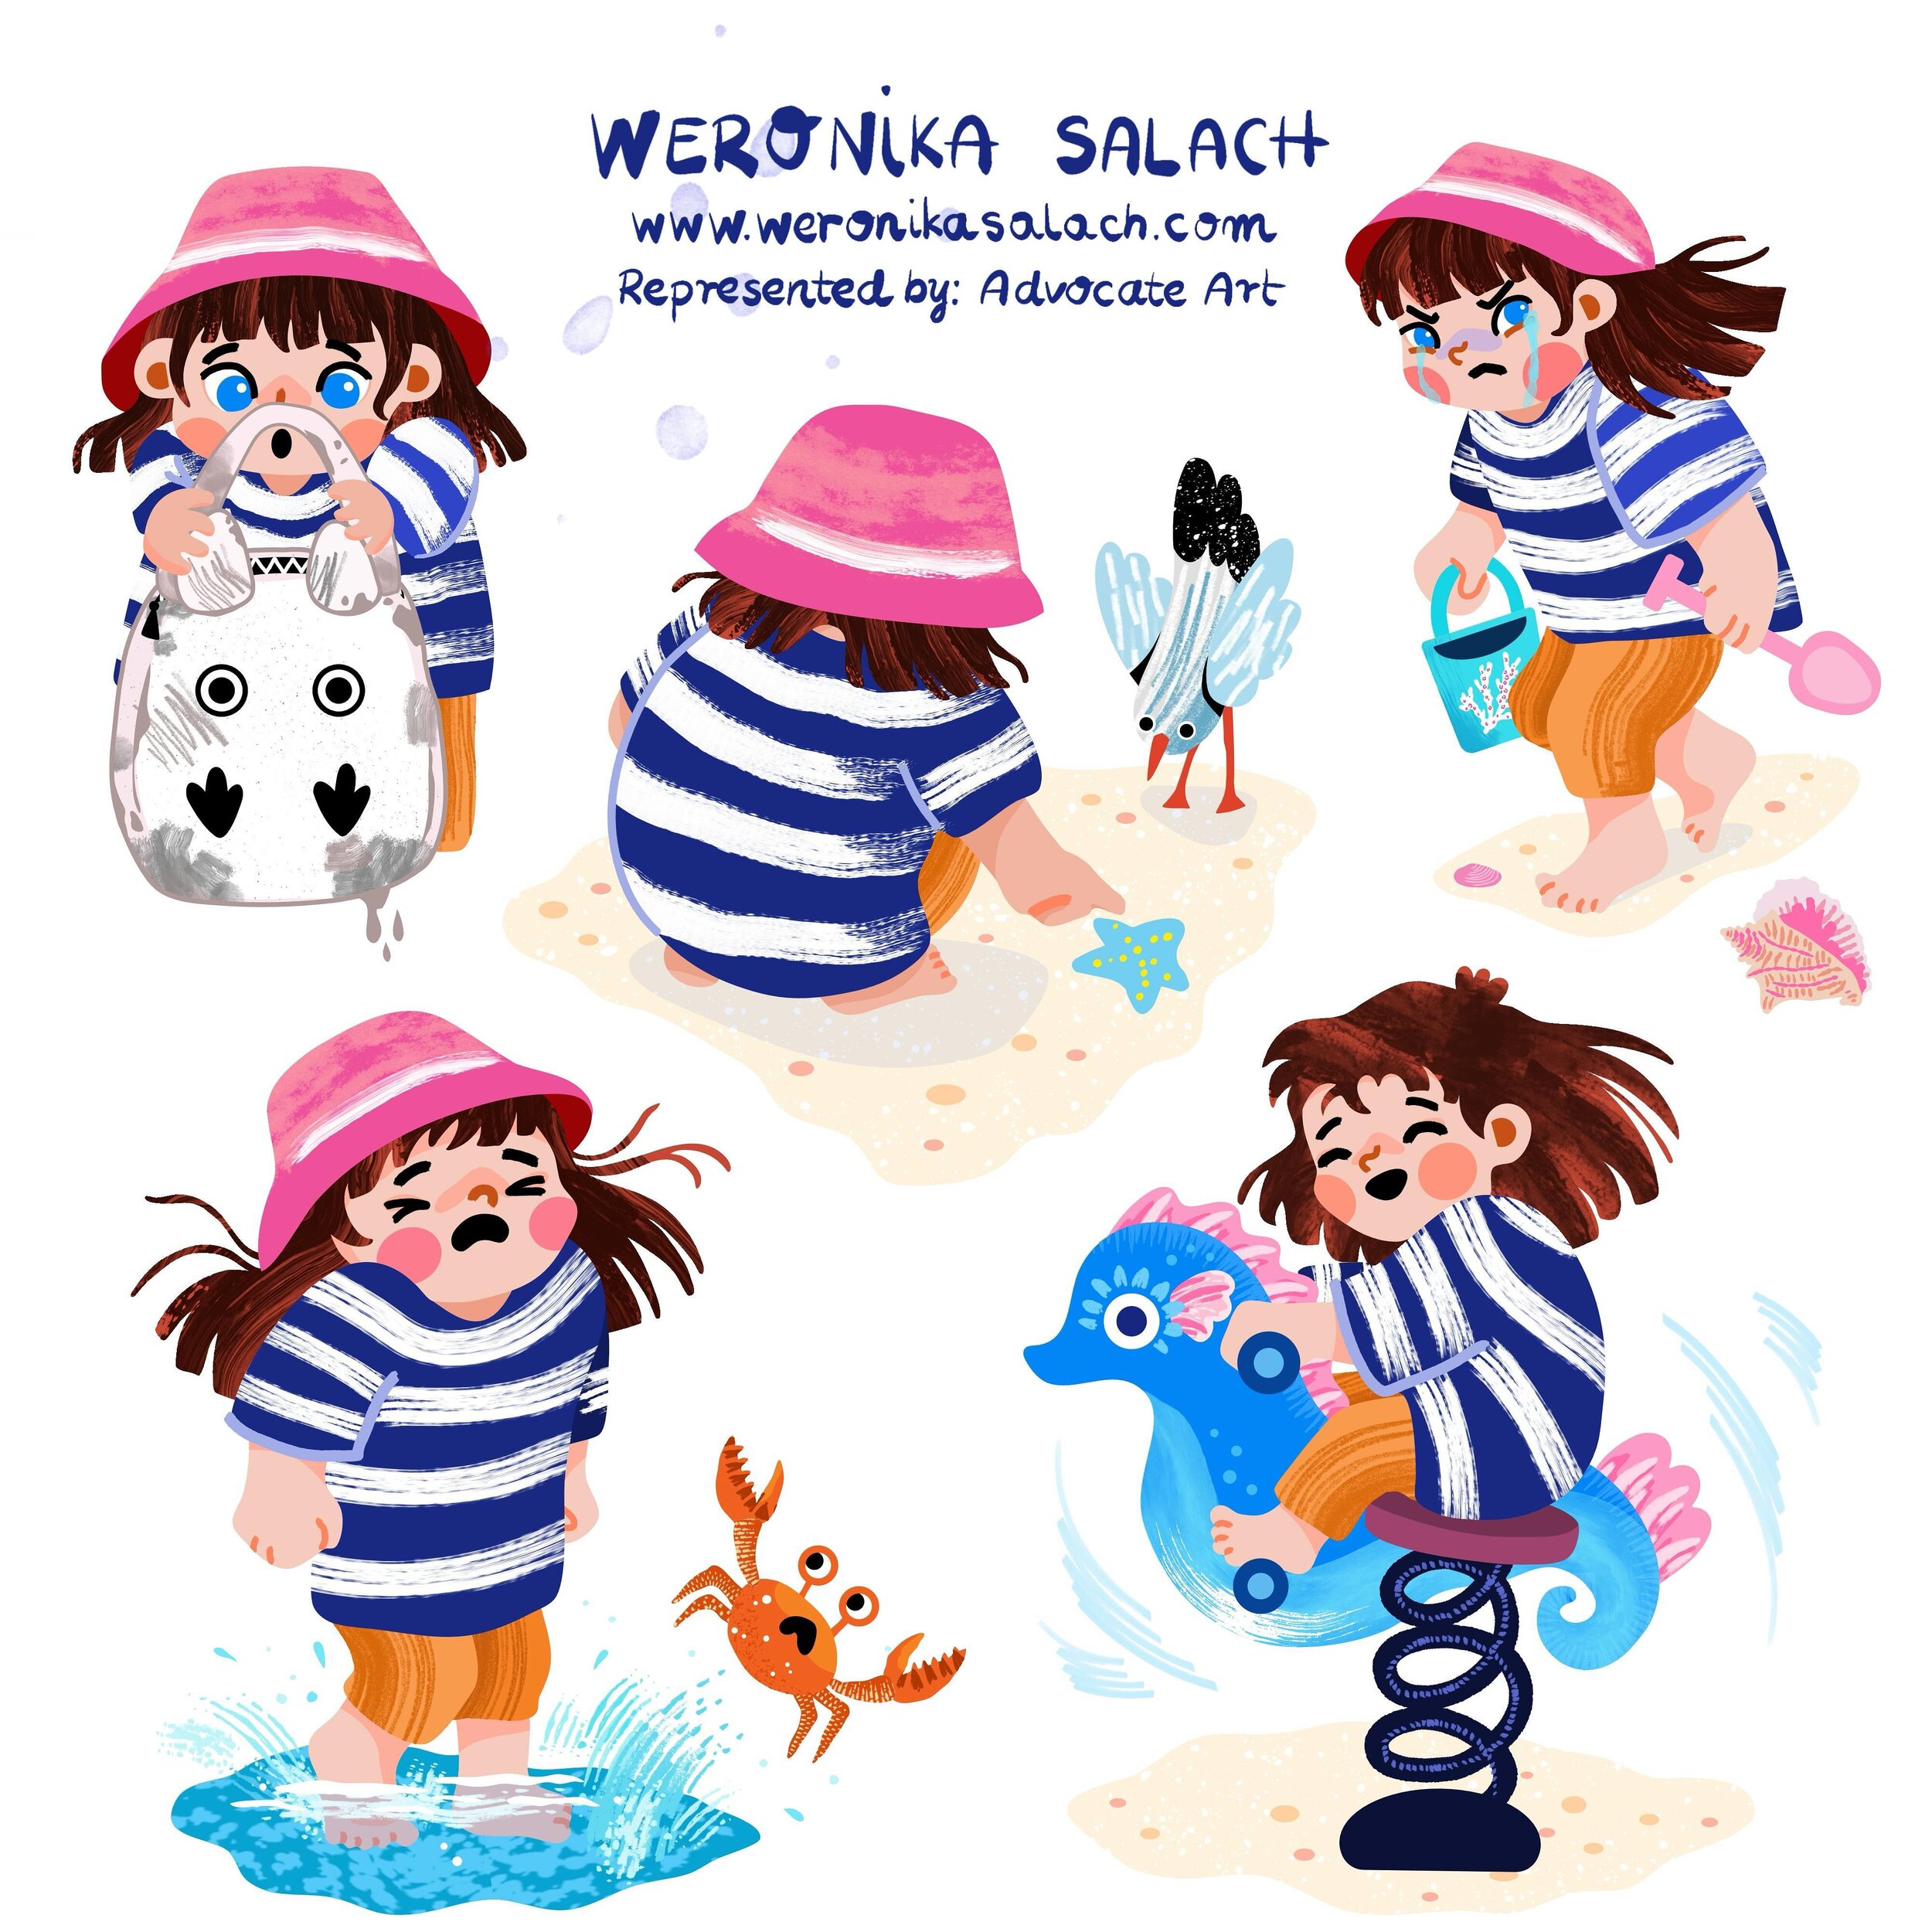 Hello! 👋 My name&rsquo;s Weronika, I&rsquo;m a Polish illustrator based in Germany. I love drawing colorful scenes filled with playful characters. I&rsquo;m available for:

⭐️ picture book projects
⭐️ board book projects
⭐️ educational toys designs
